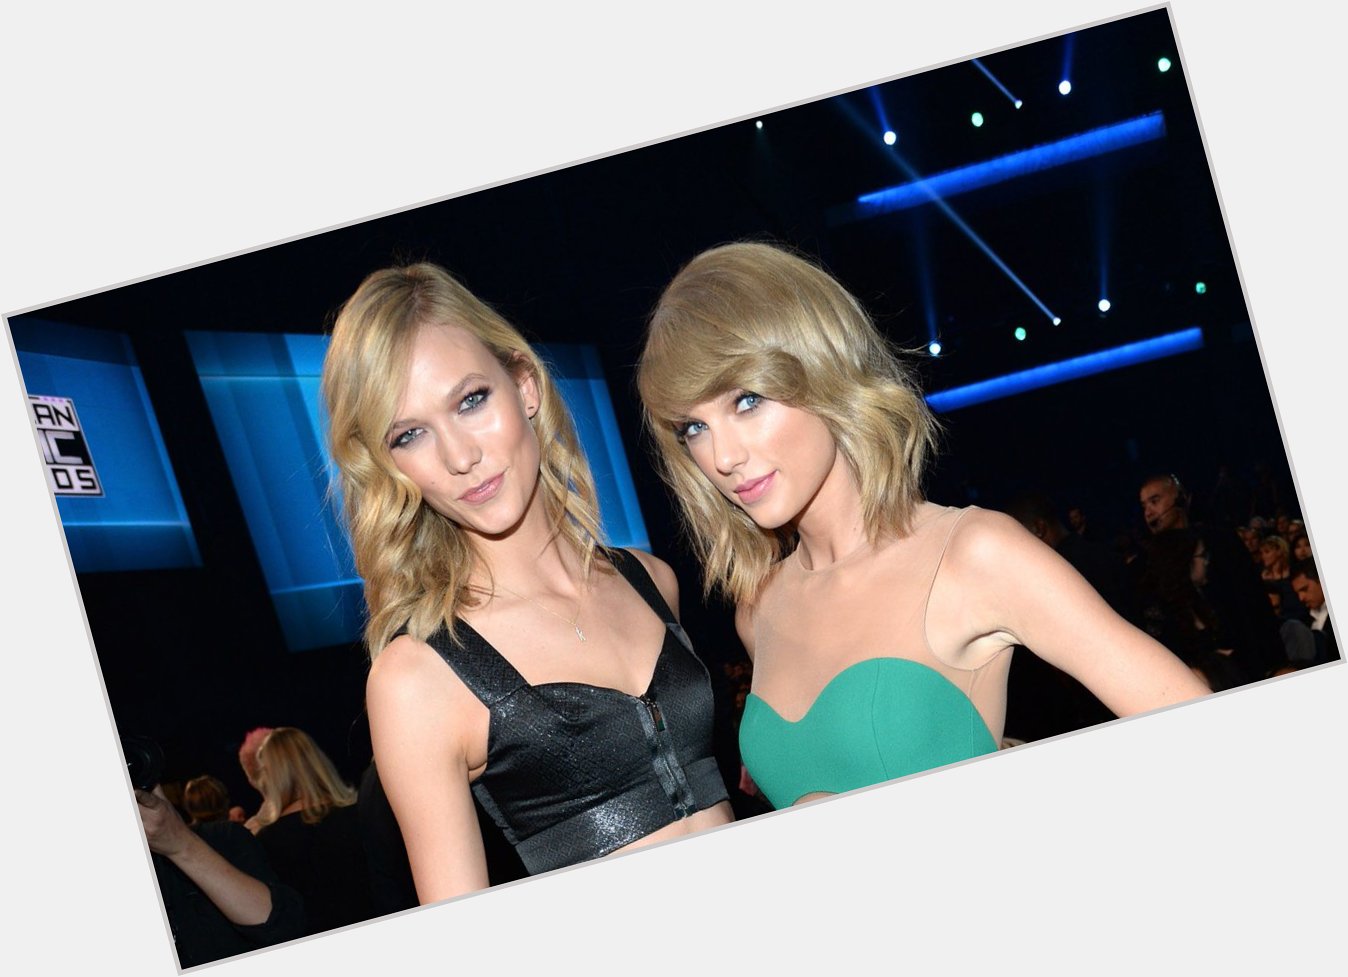 Karlie Kloss just squashed rumors that she has beef with Taylor Swift:  